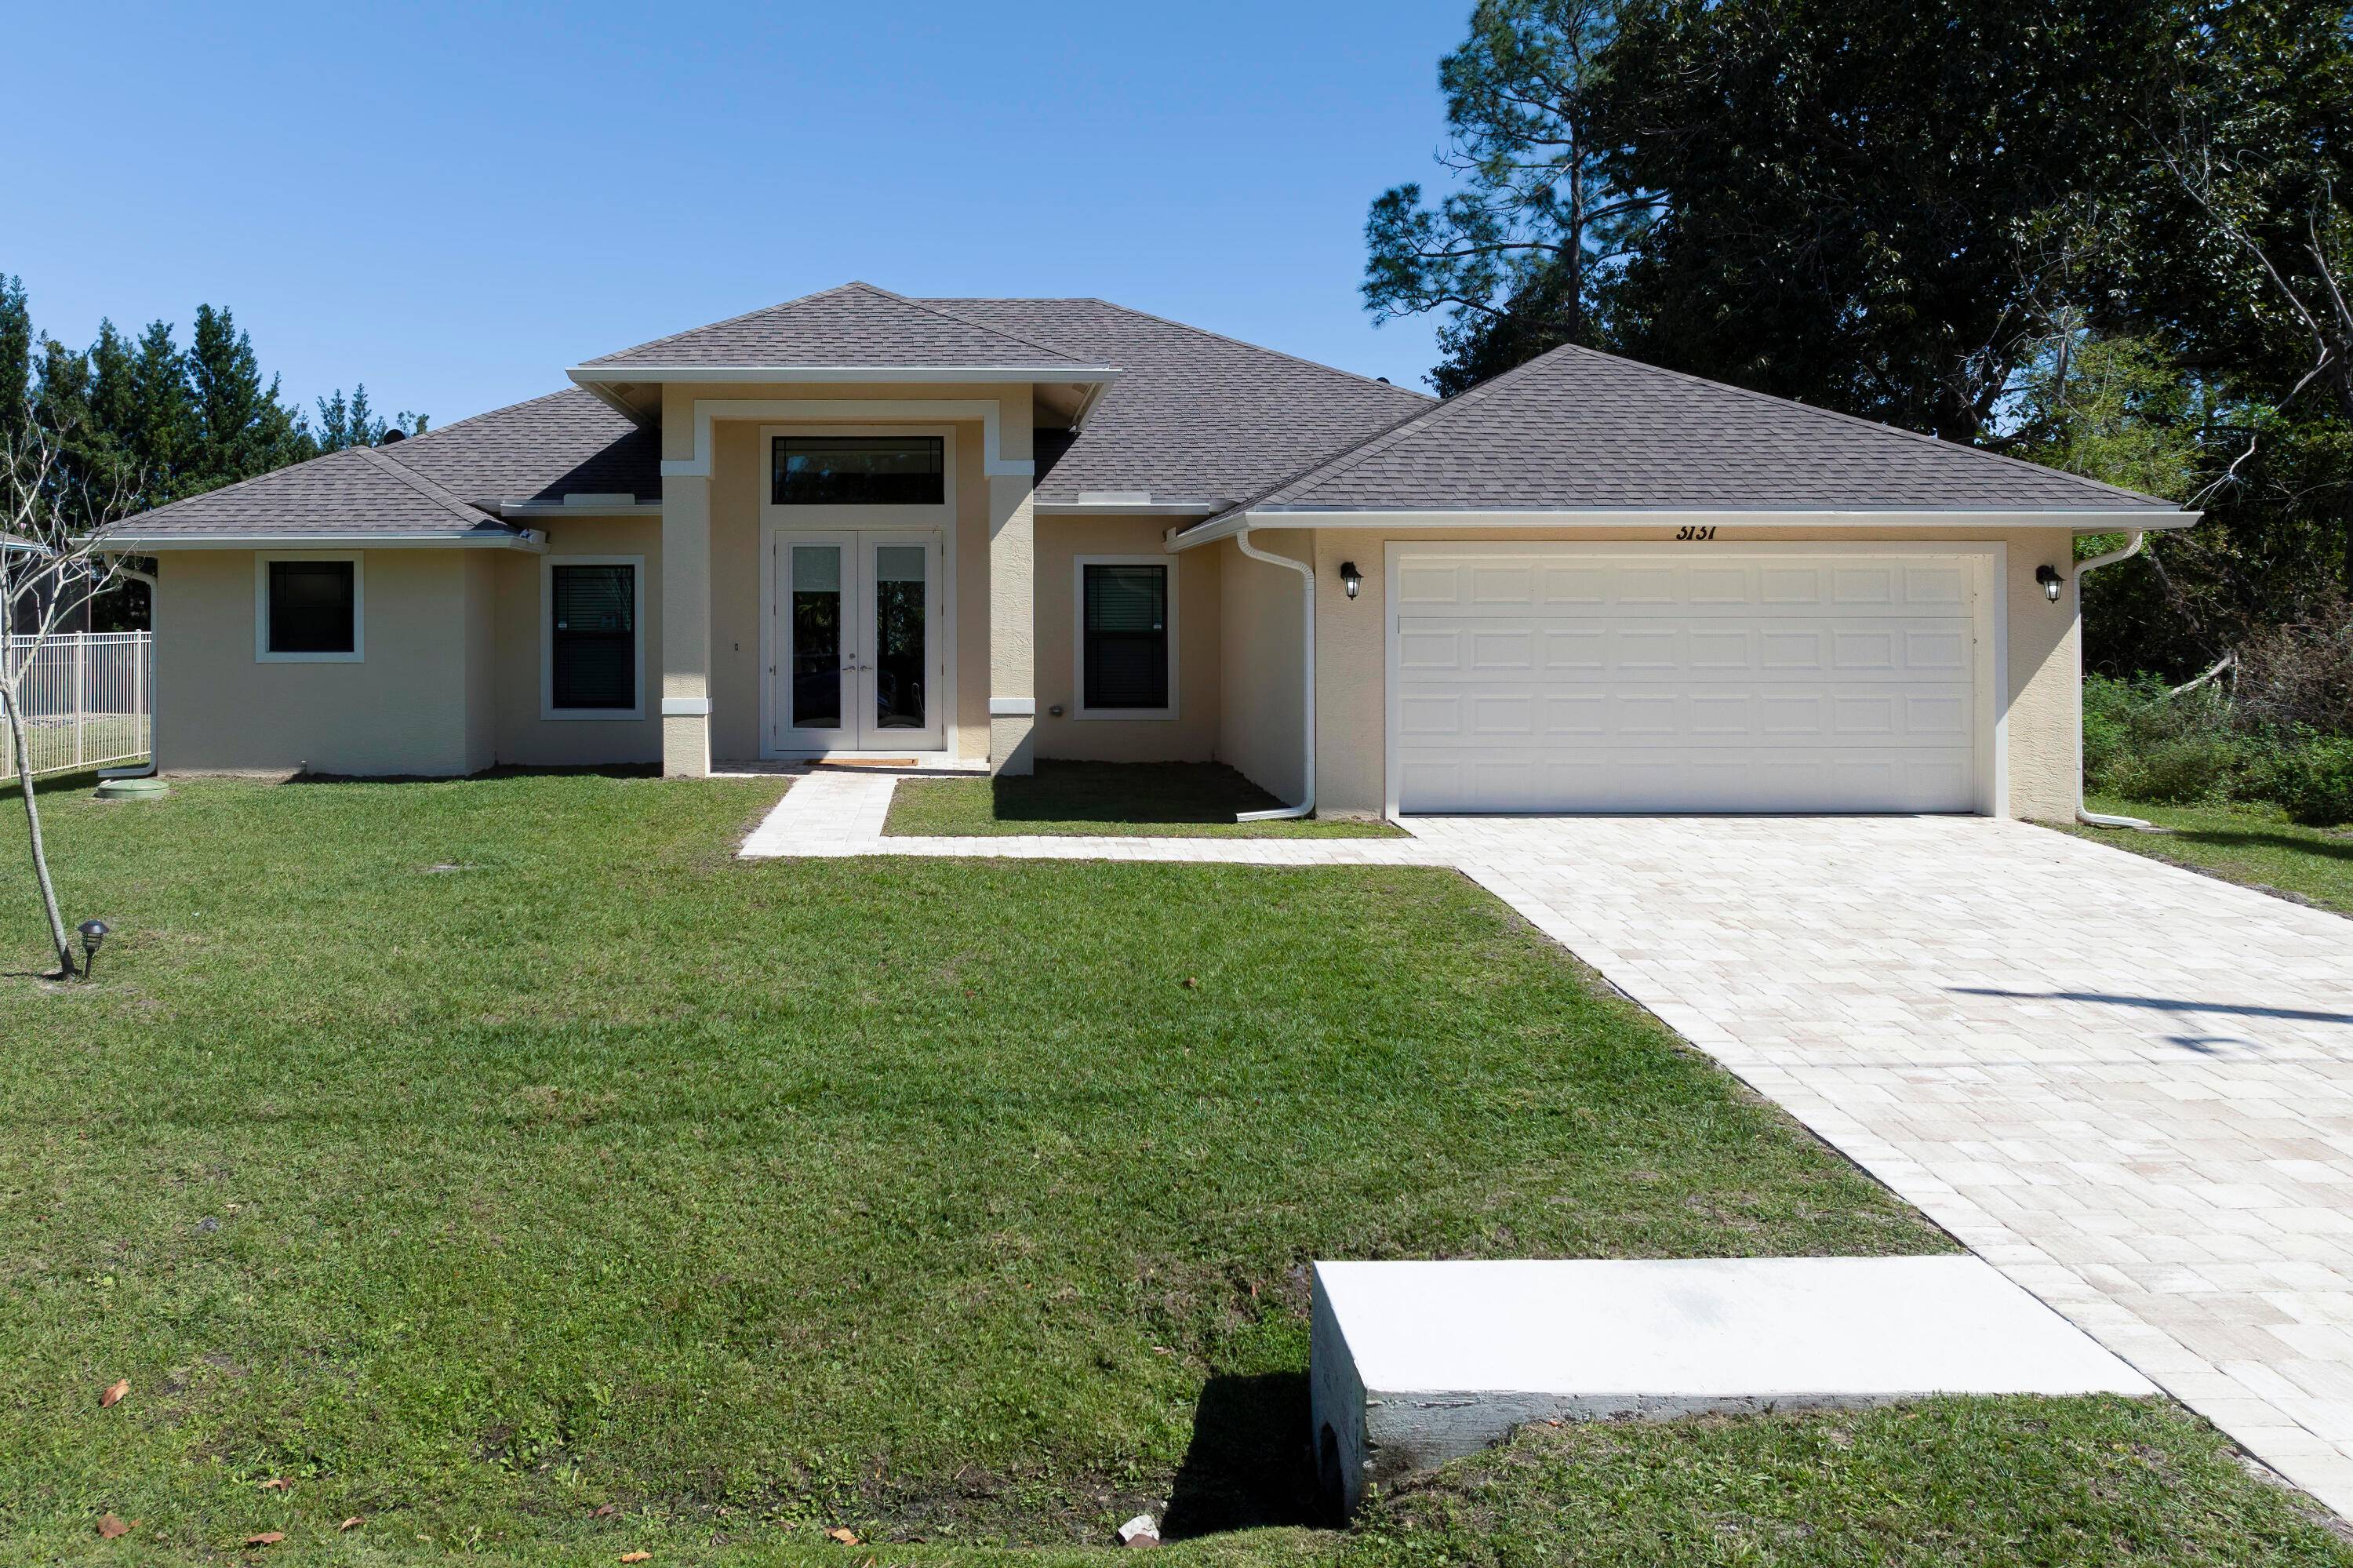 Just built 3 bed 2 bath home in PSL off Savona featuring 2, 279 Sq Ft of luxury living space.